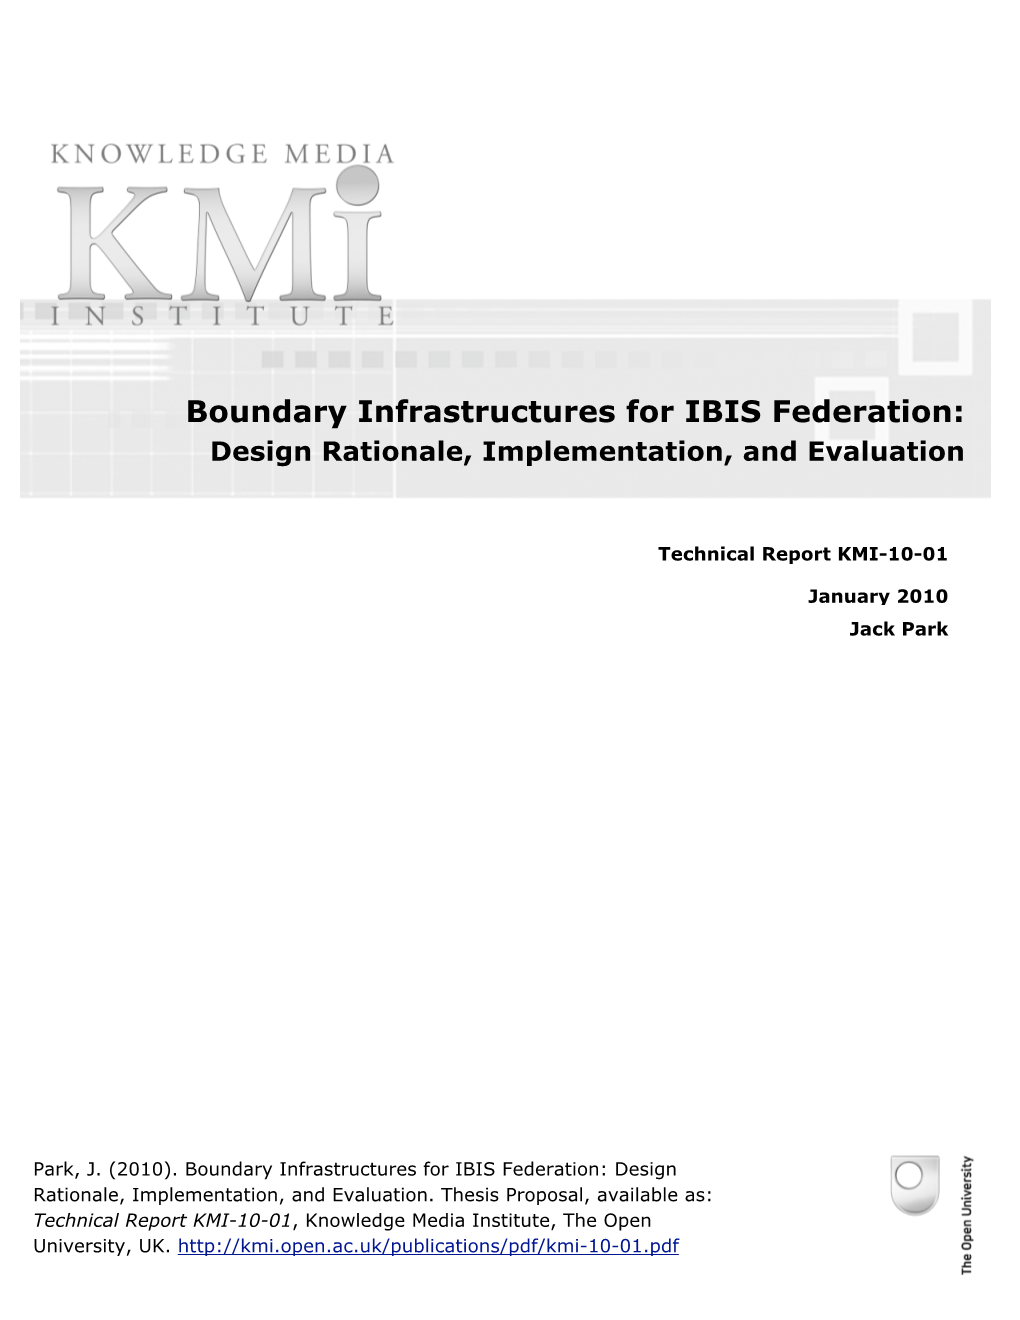 Boundary Infrastructures for IBIS Federation: Design Rationale, Implementation, and Evaluation